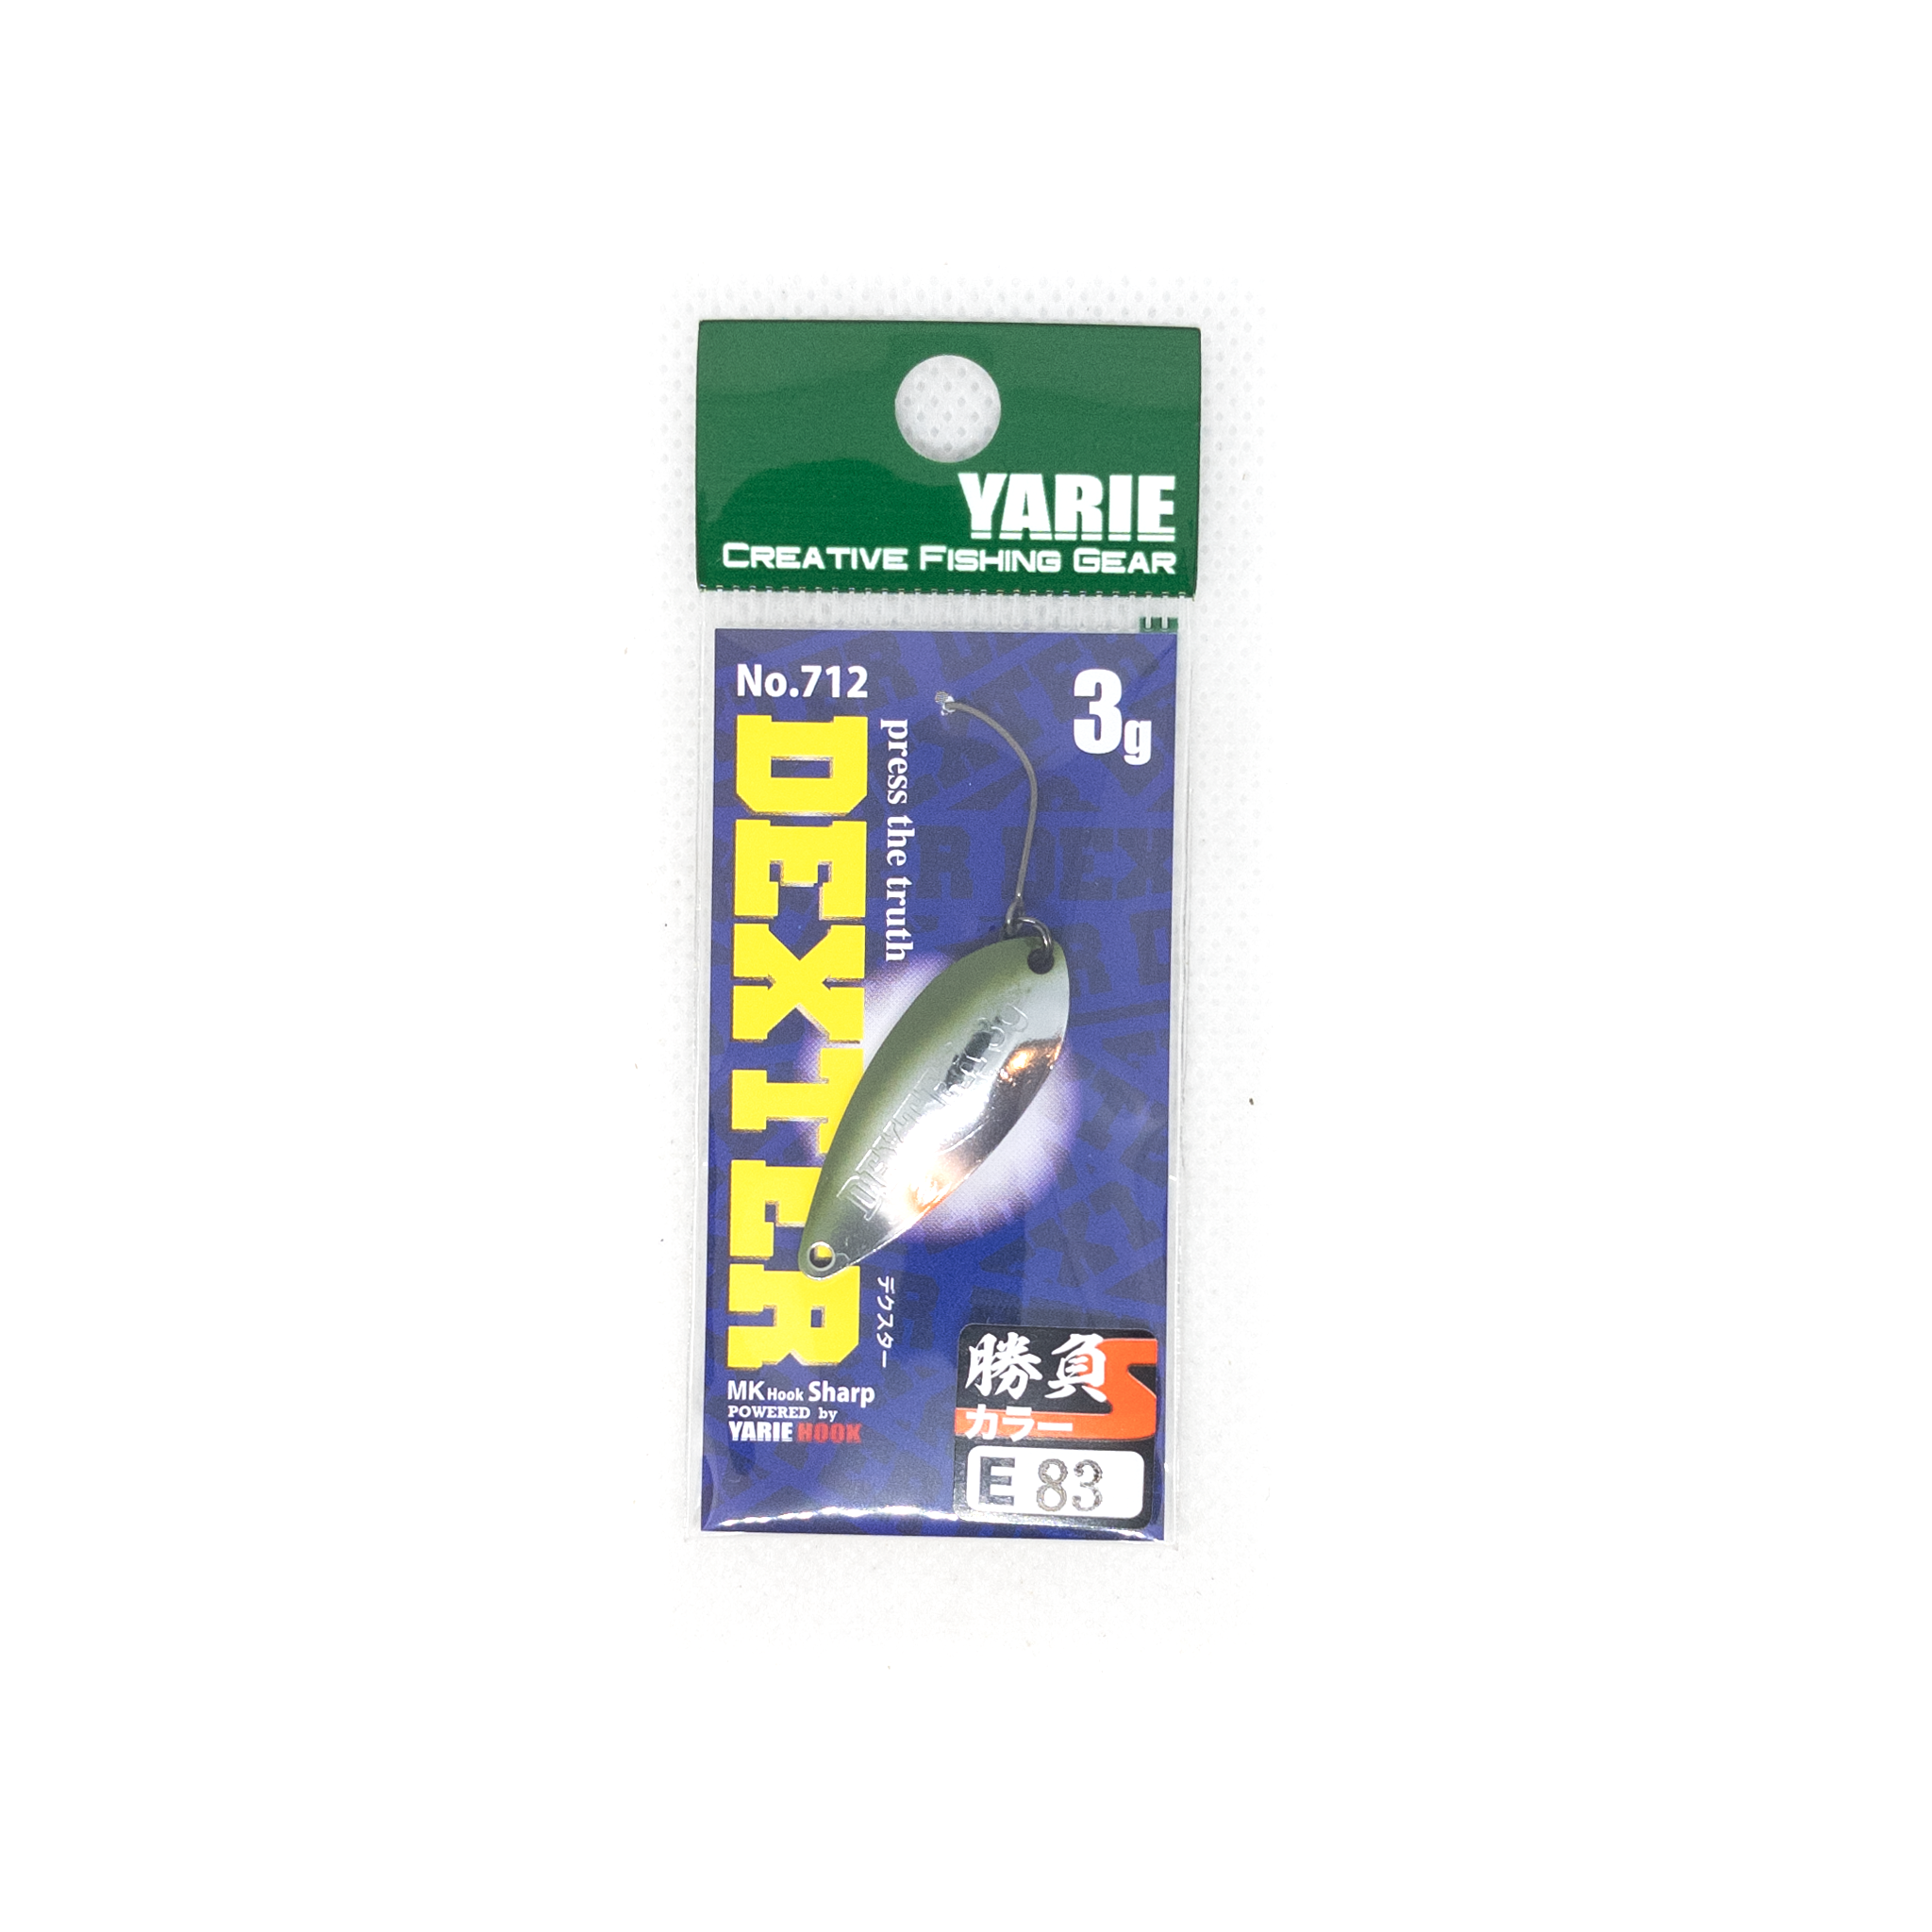 YARIE Dexter Trout Spoon 3.0g Color #E83 Sabi Ayu – The Borrowed Lure